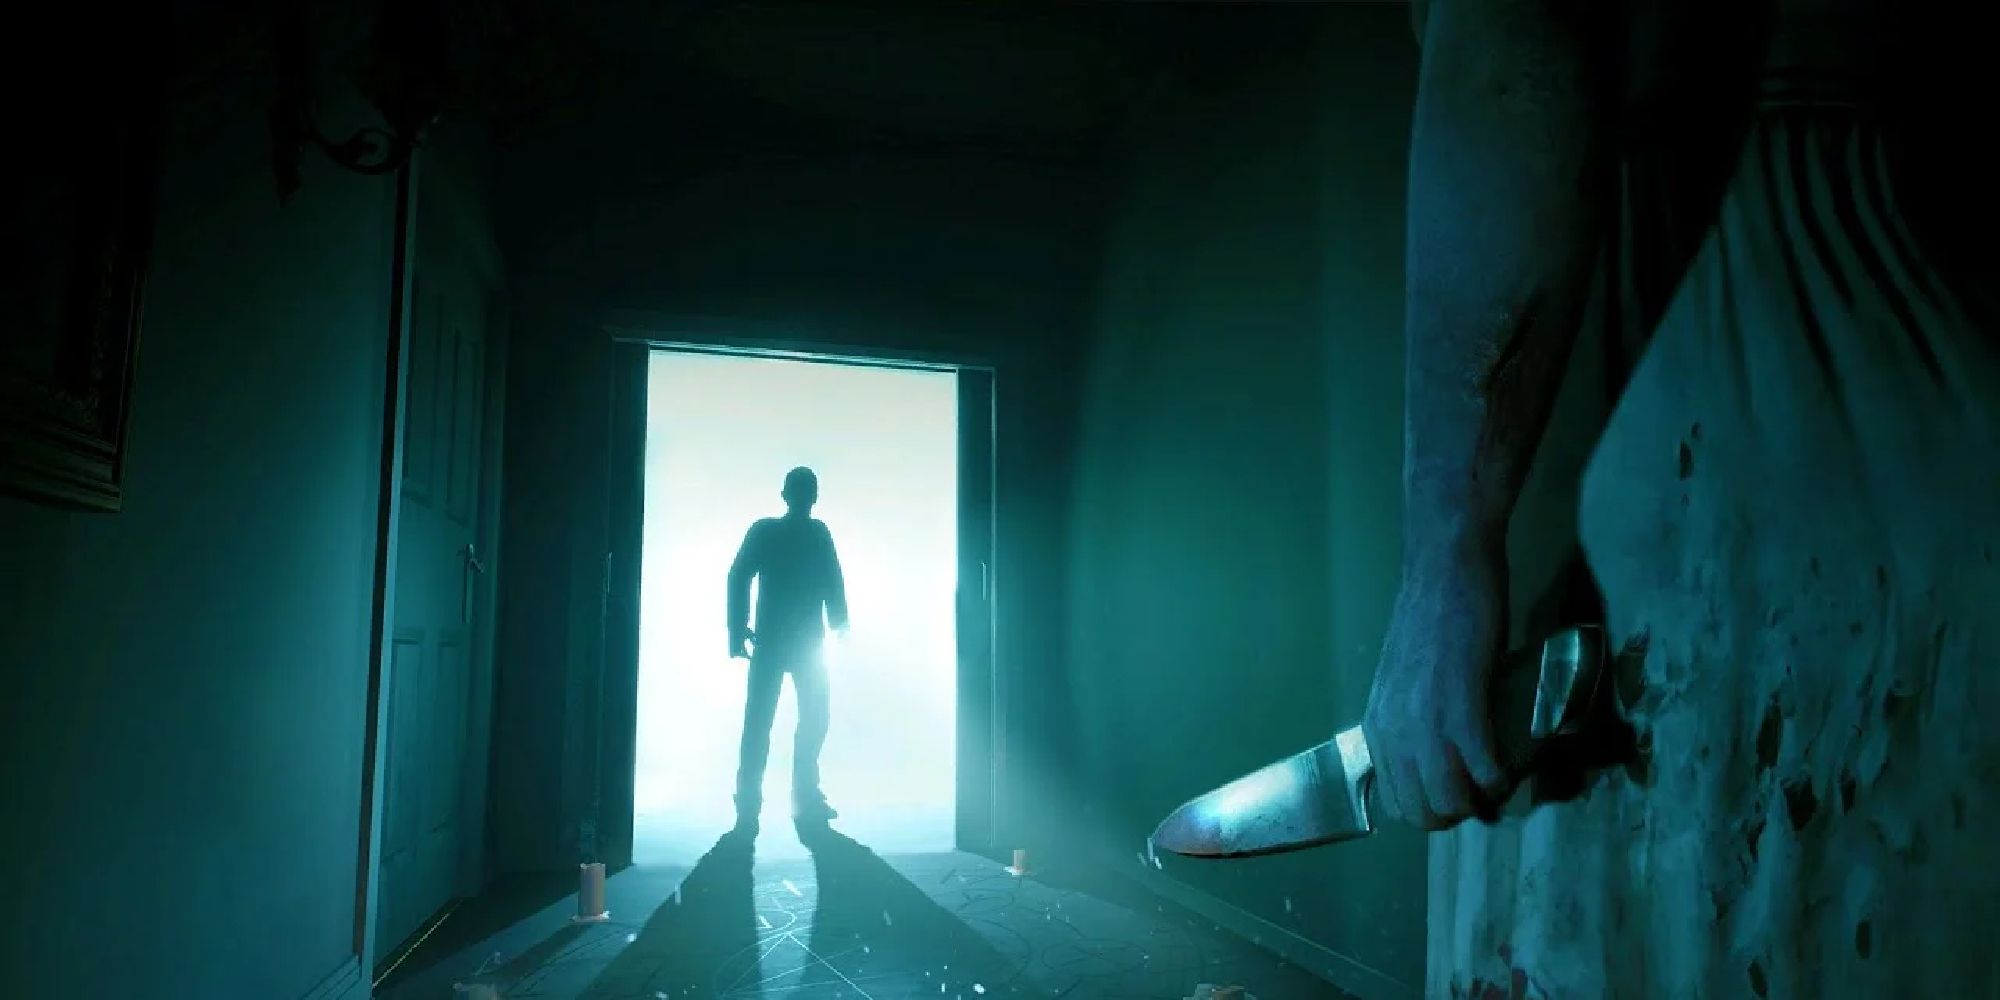 A woman holding a knife faces a silhouette in an open doorway.